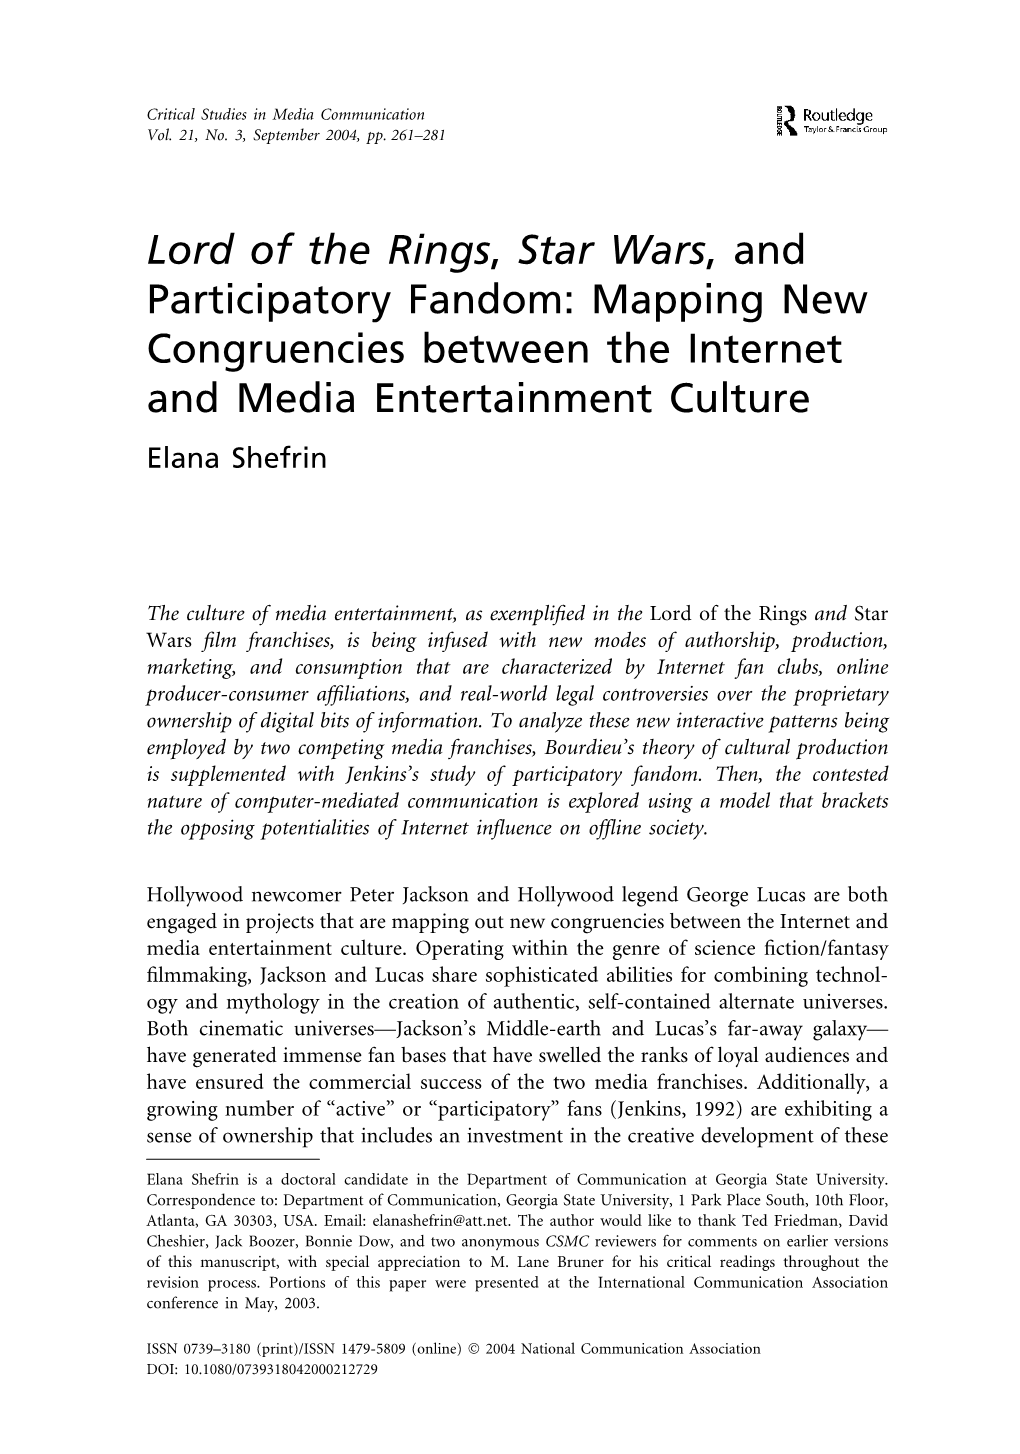 Lord of the Rings, Star Wars, and Participatory Fandom: Mapping New Congruencies Between the Internet and Media Entertainment Culture Elana Shefrin